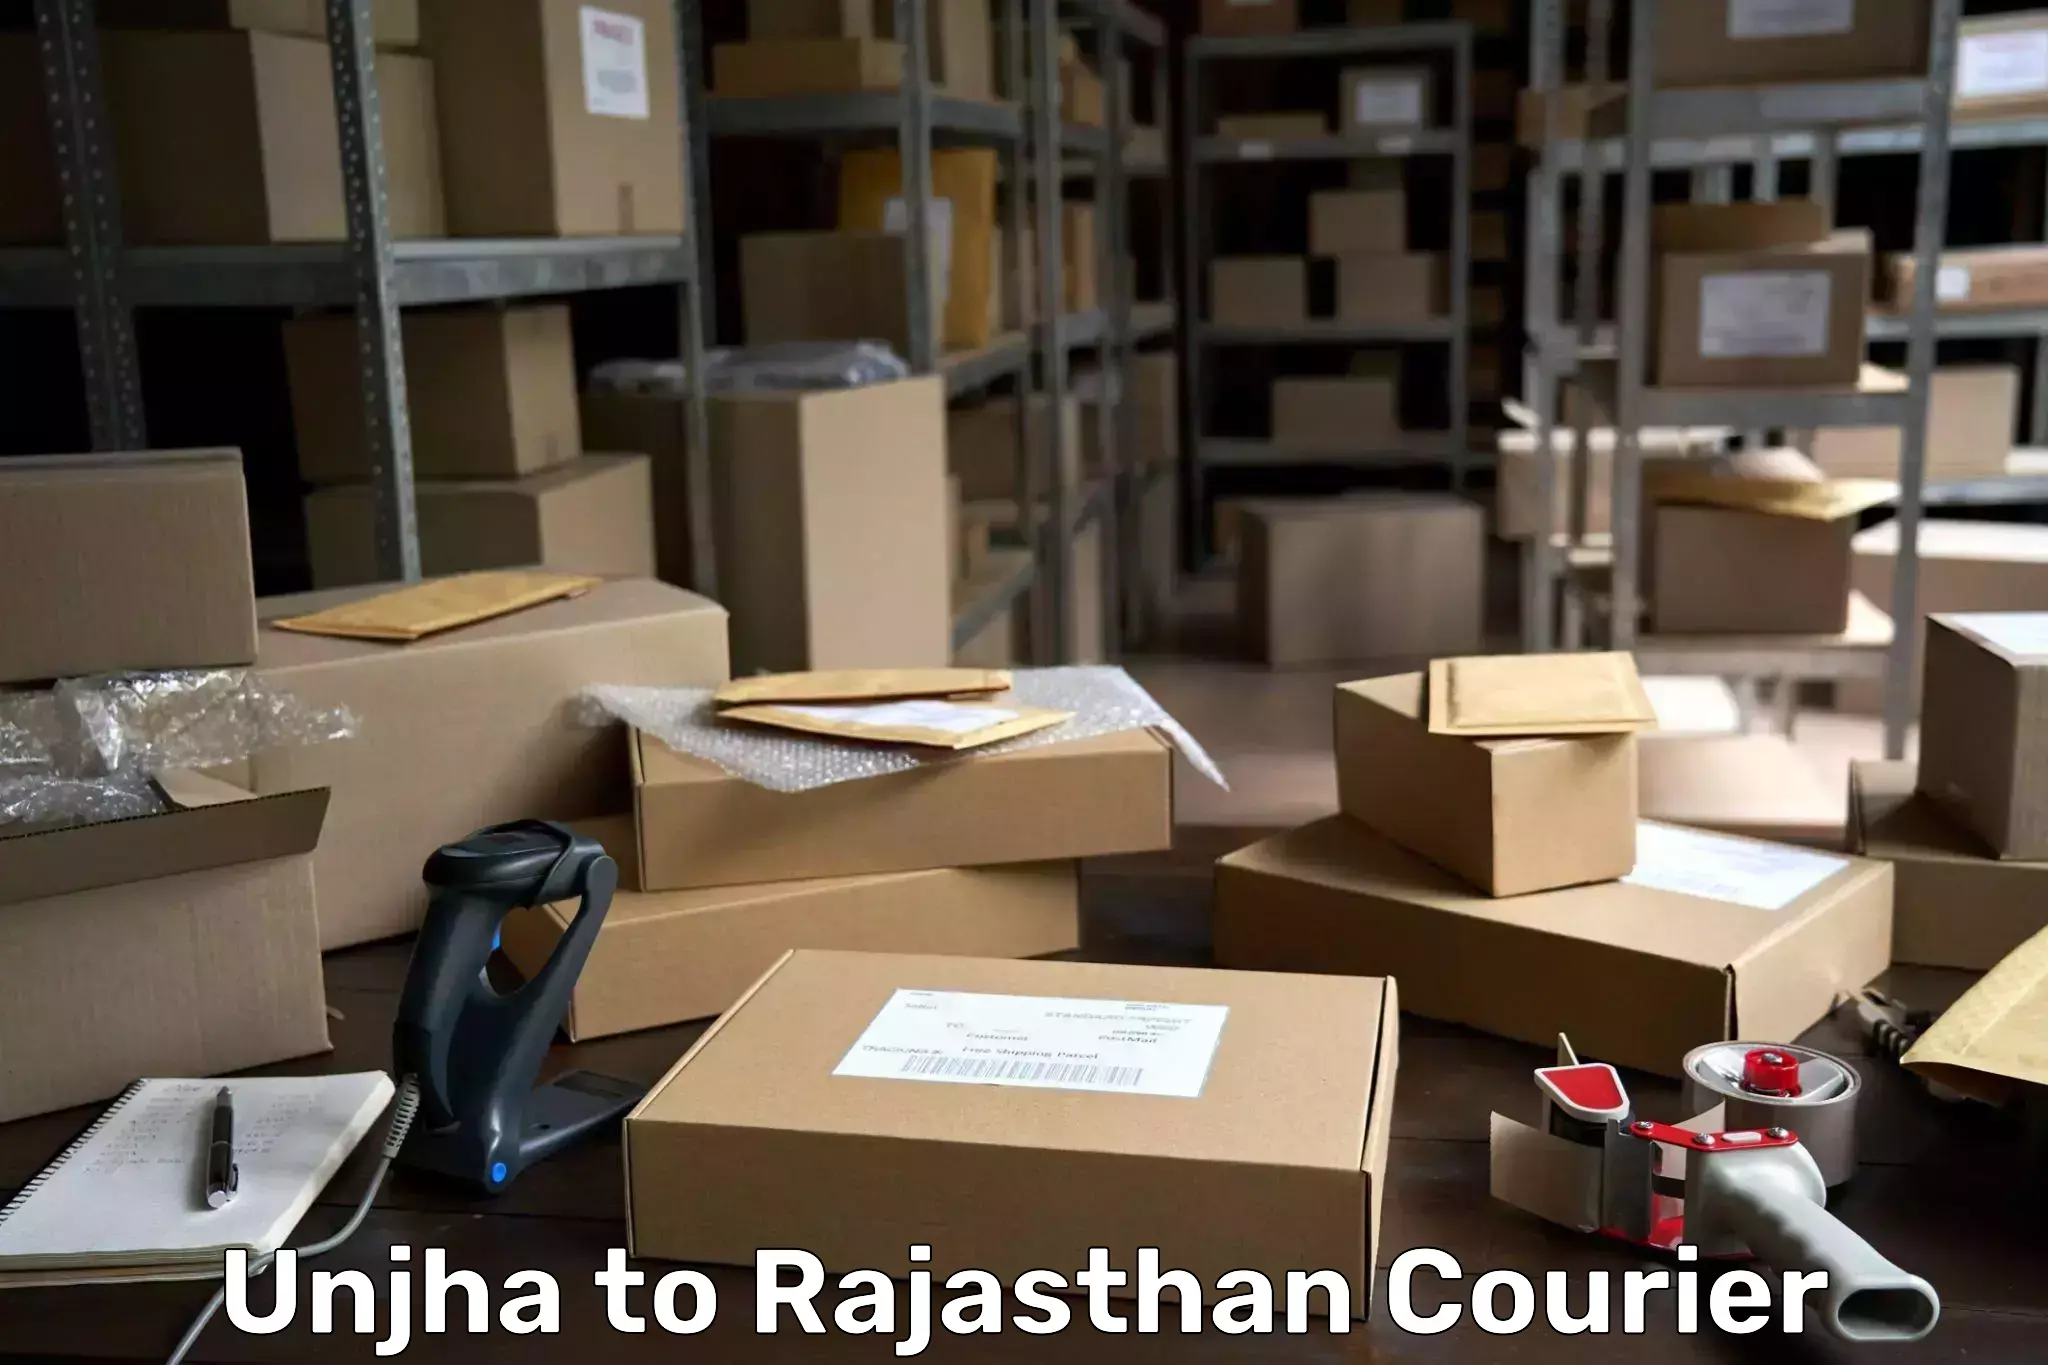 State-of-the-art courier technology Unjha to Udaipurwati